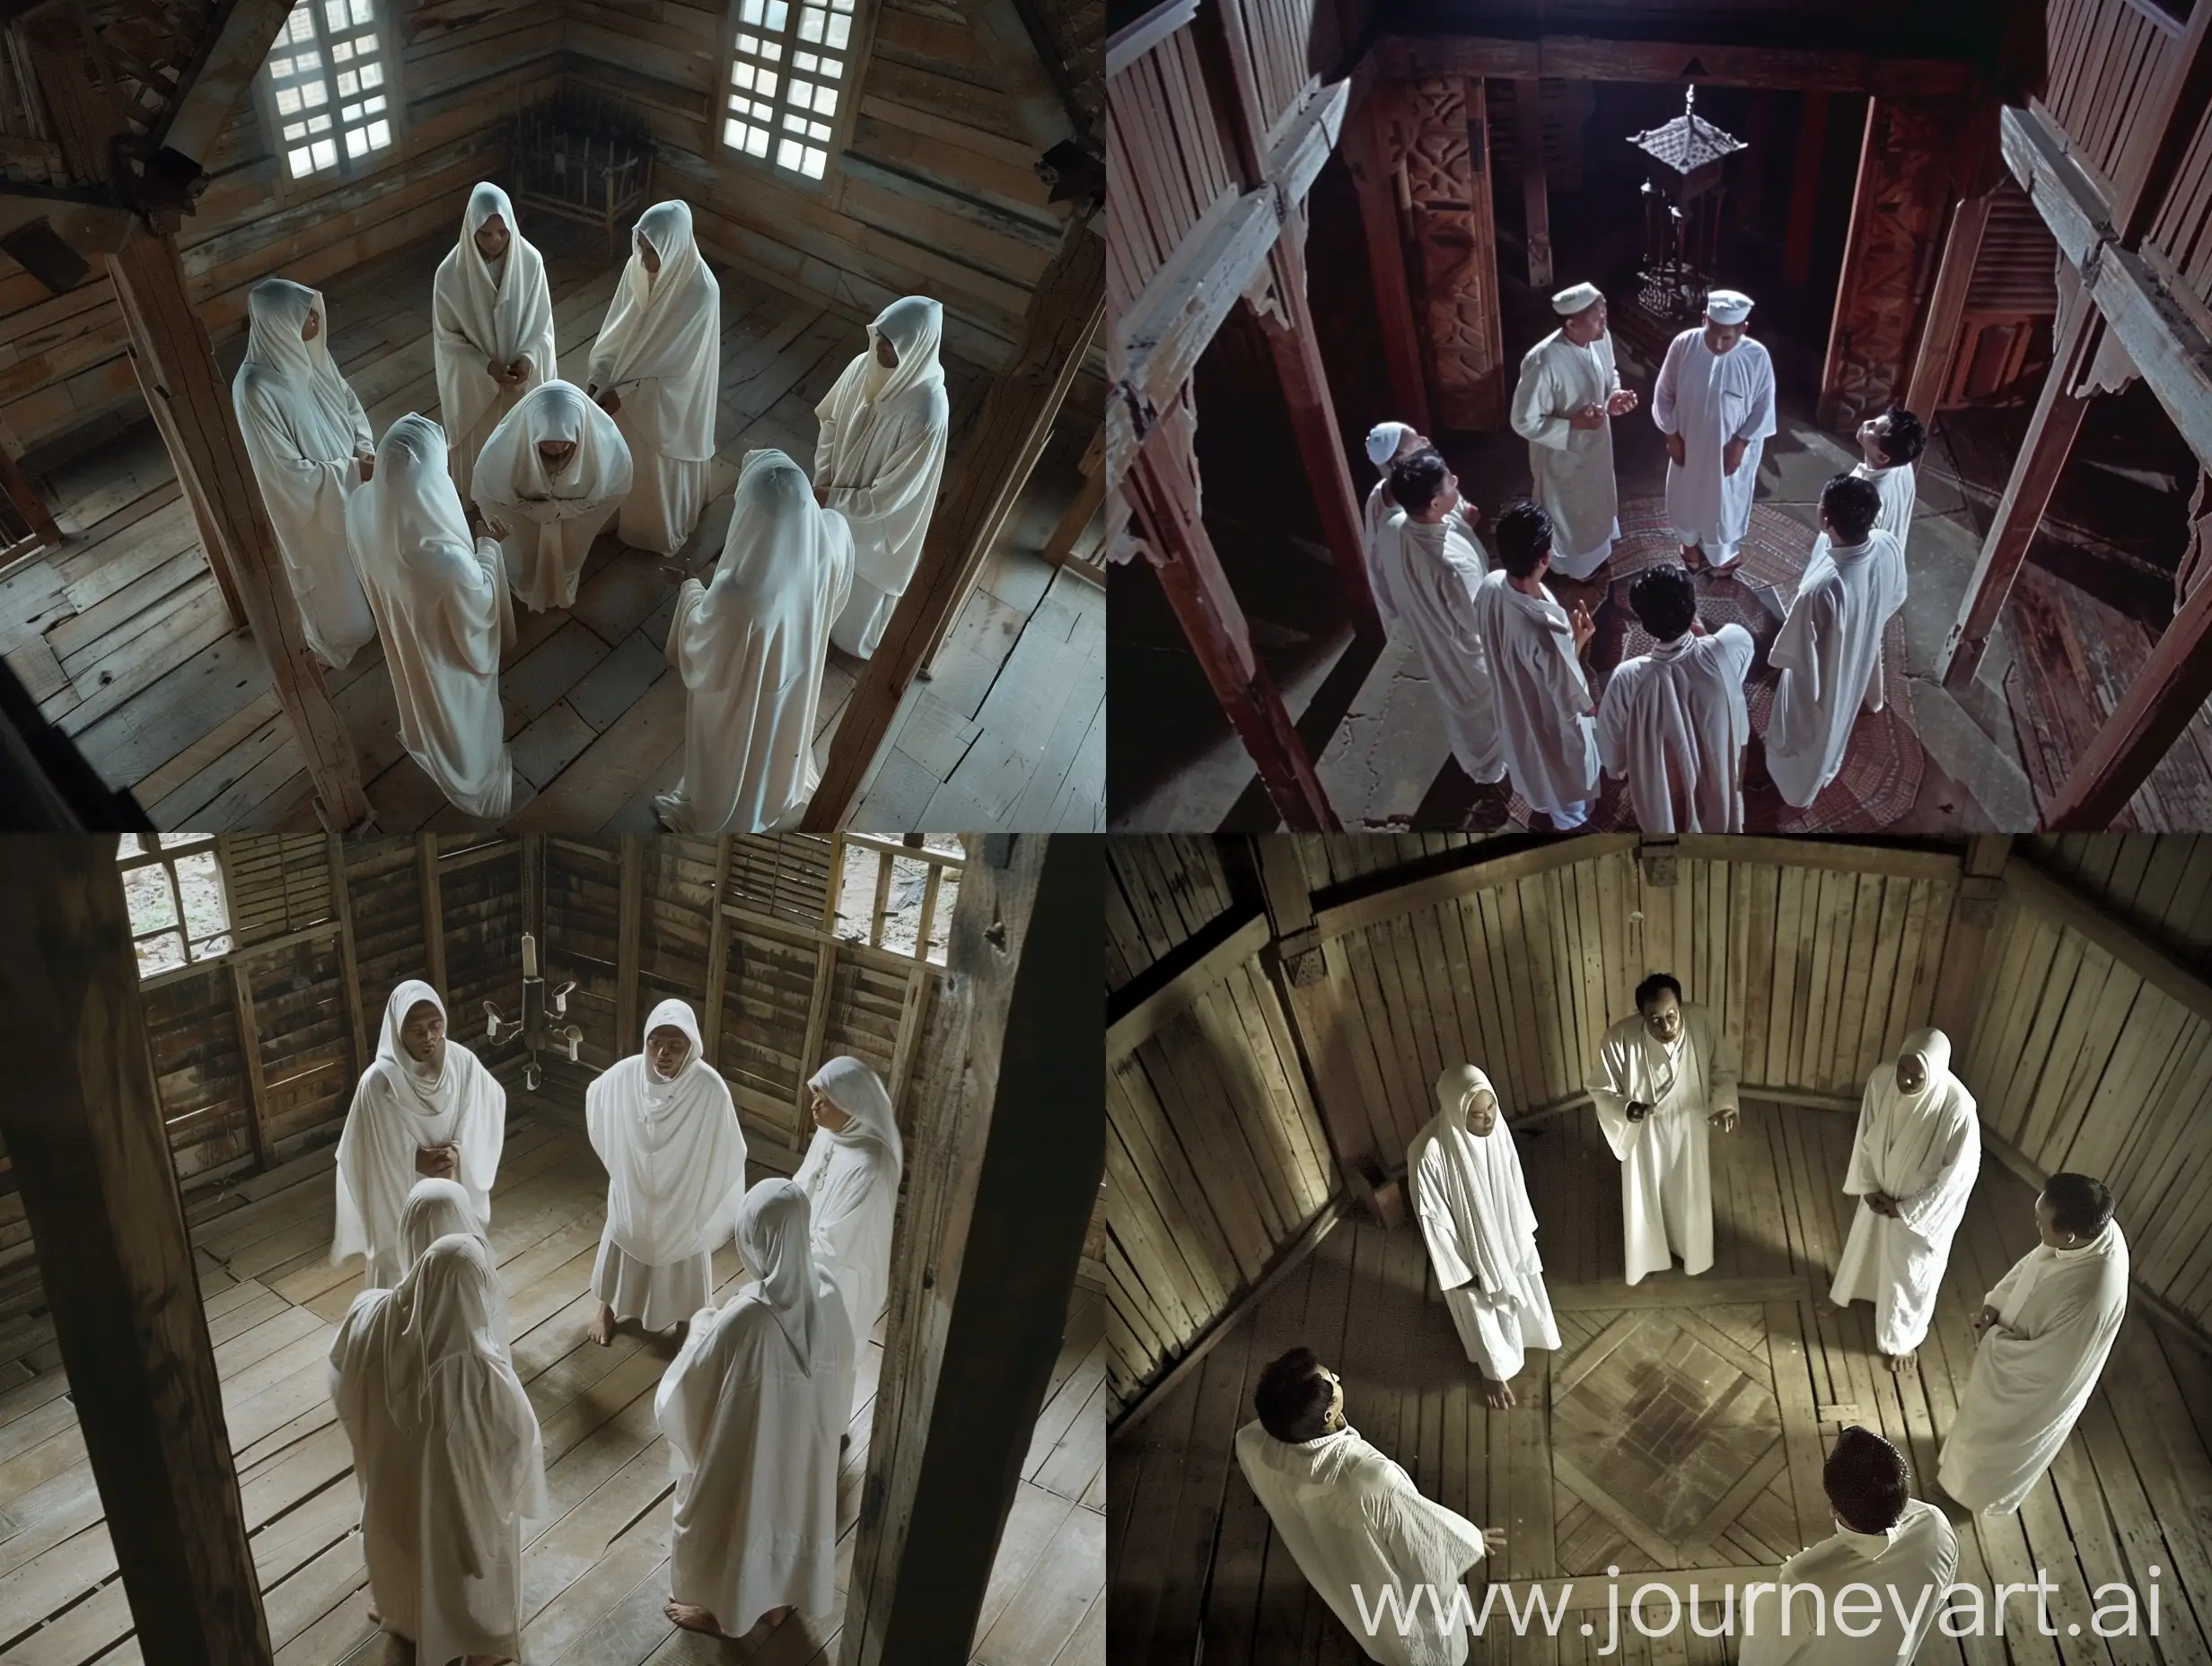 Indonesian-Men-in-White-Robes-Performing-Ritual-in-Wooden-Mosque